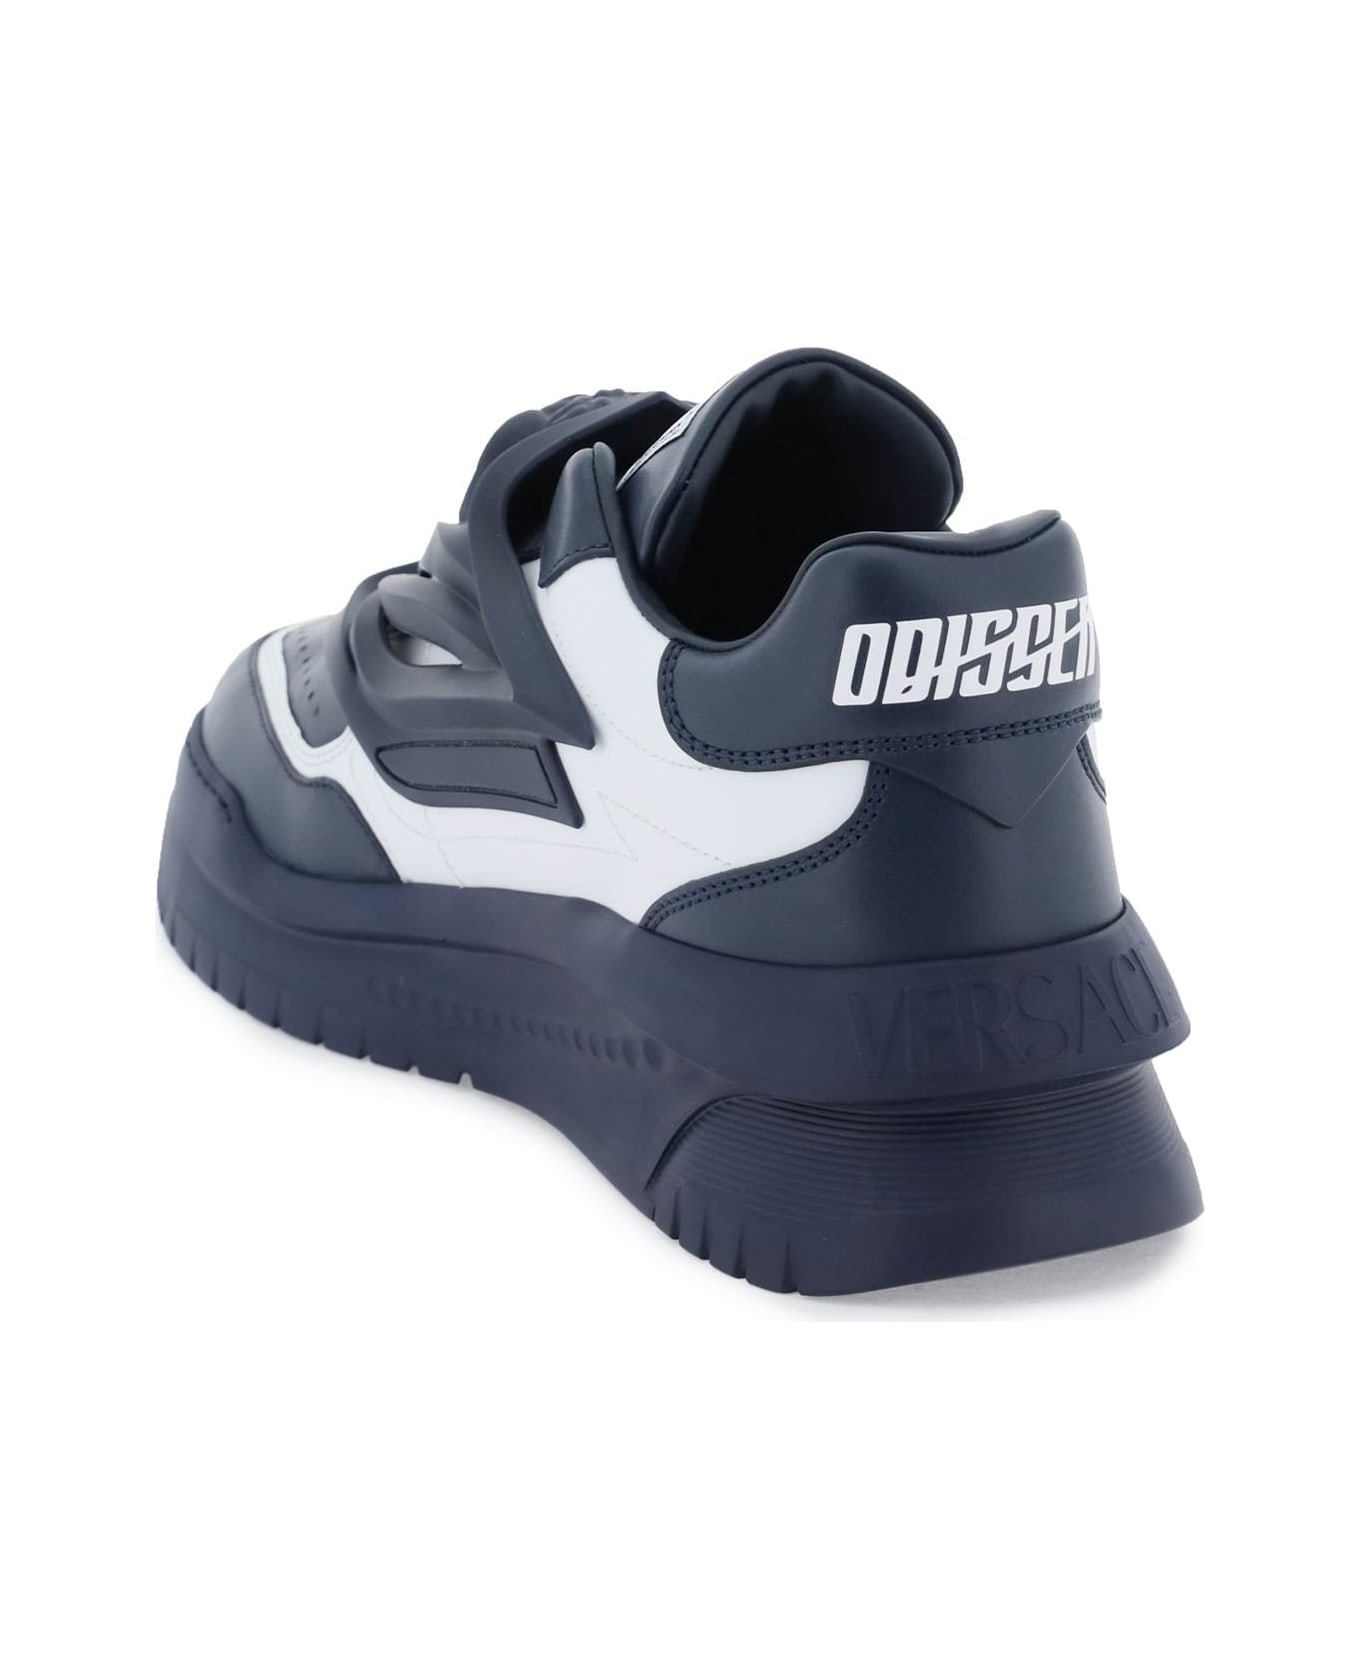 Versace Odissea Sneakers - BLUE NIGHT  WHITE (White) スニーカー